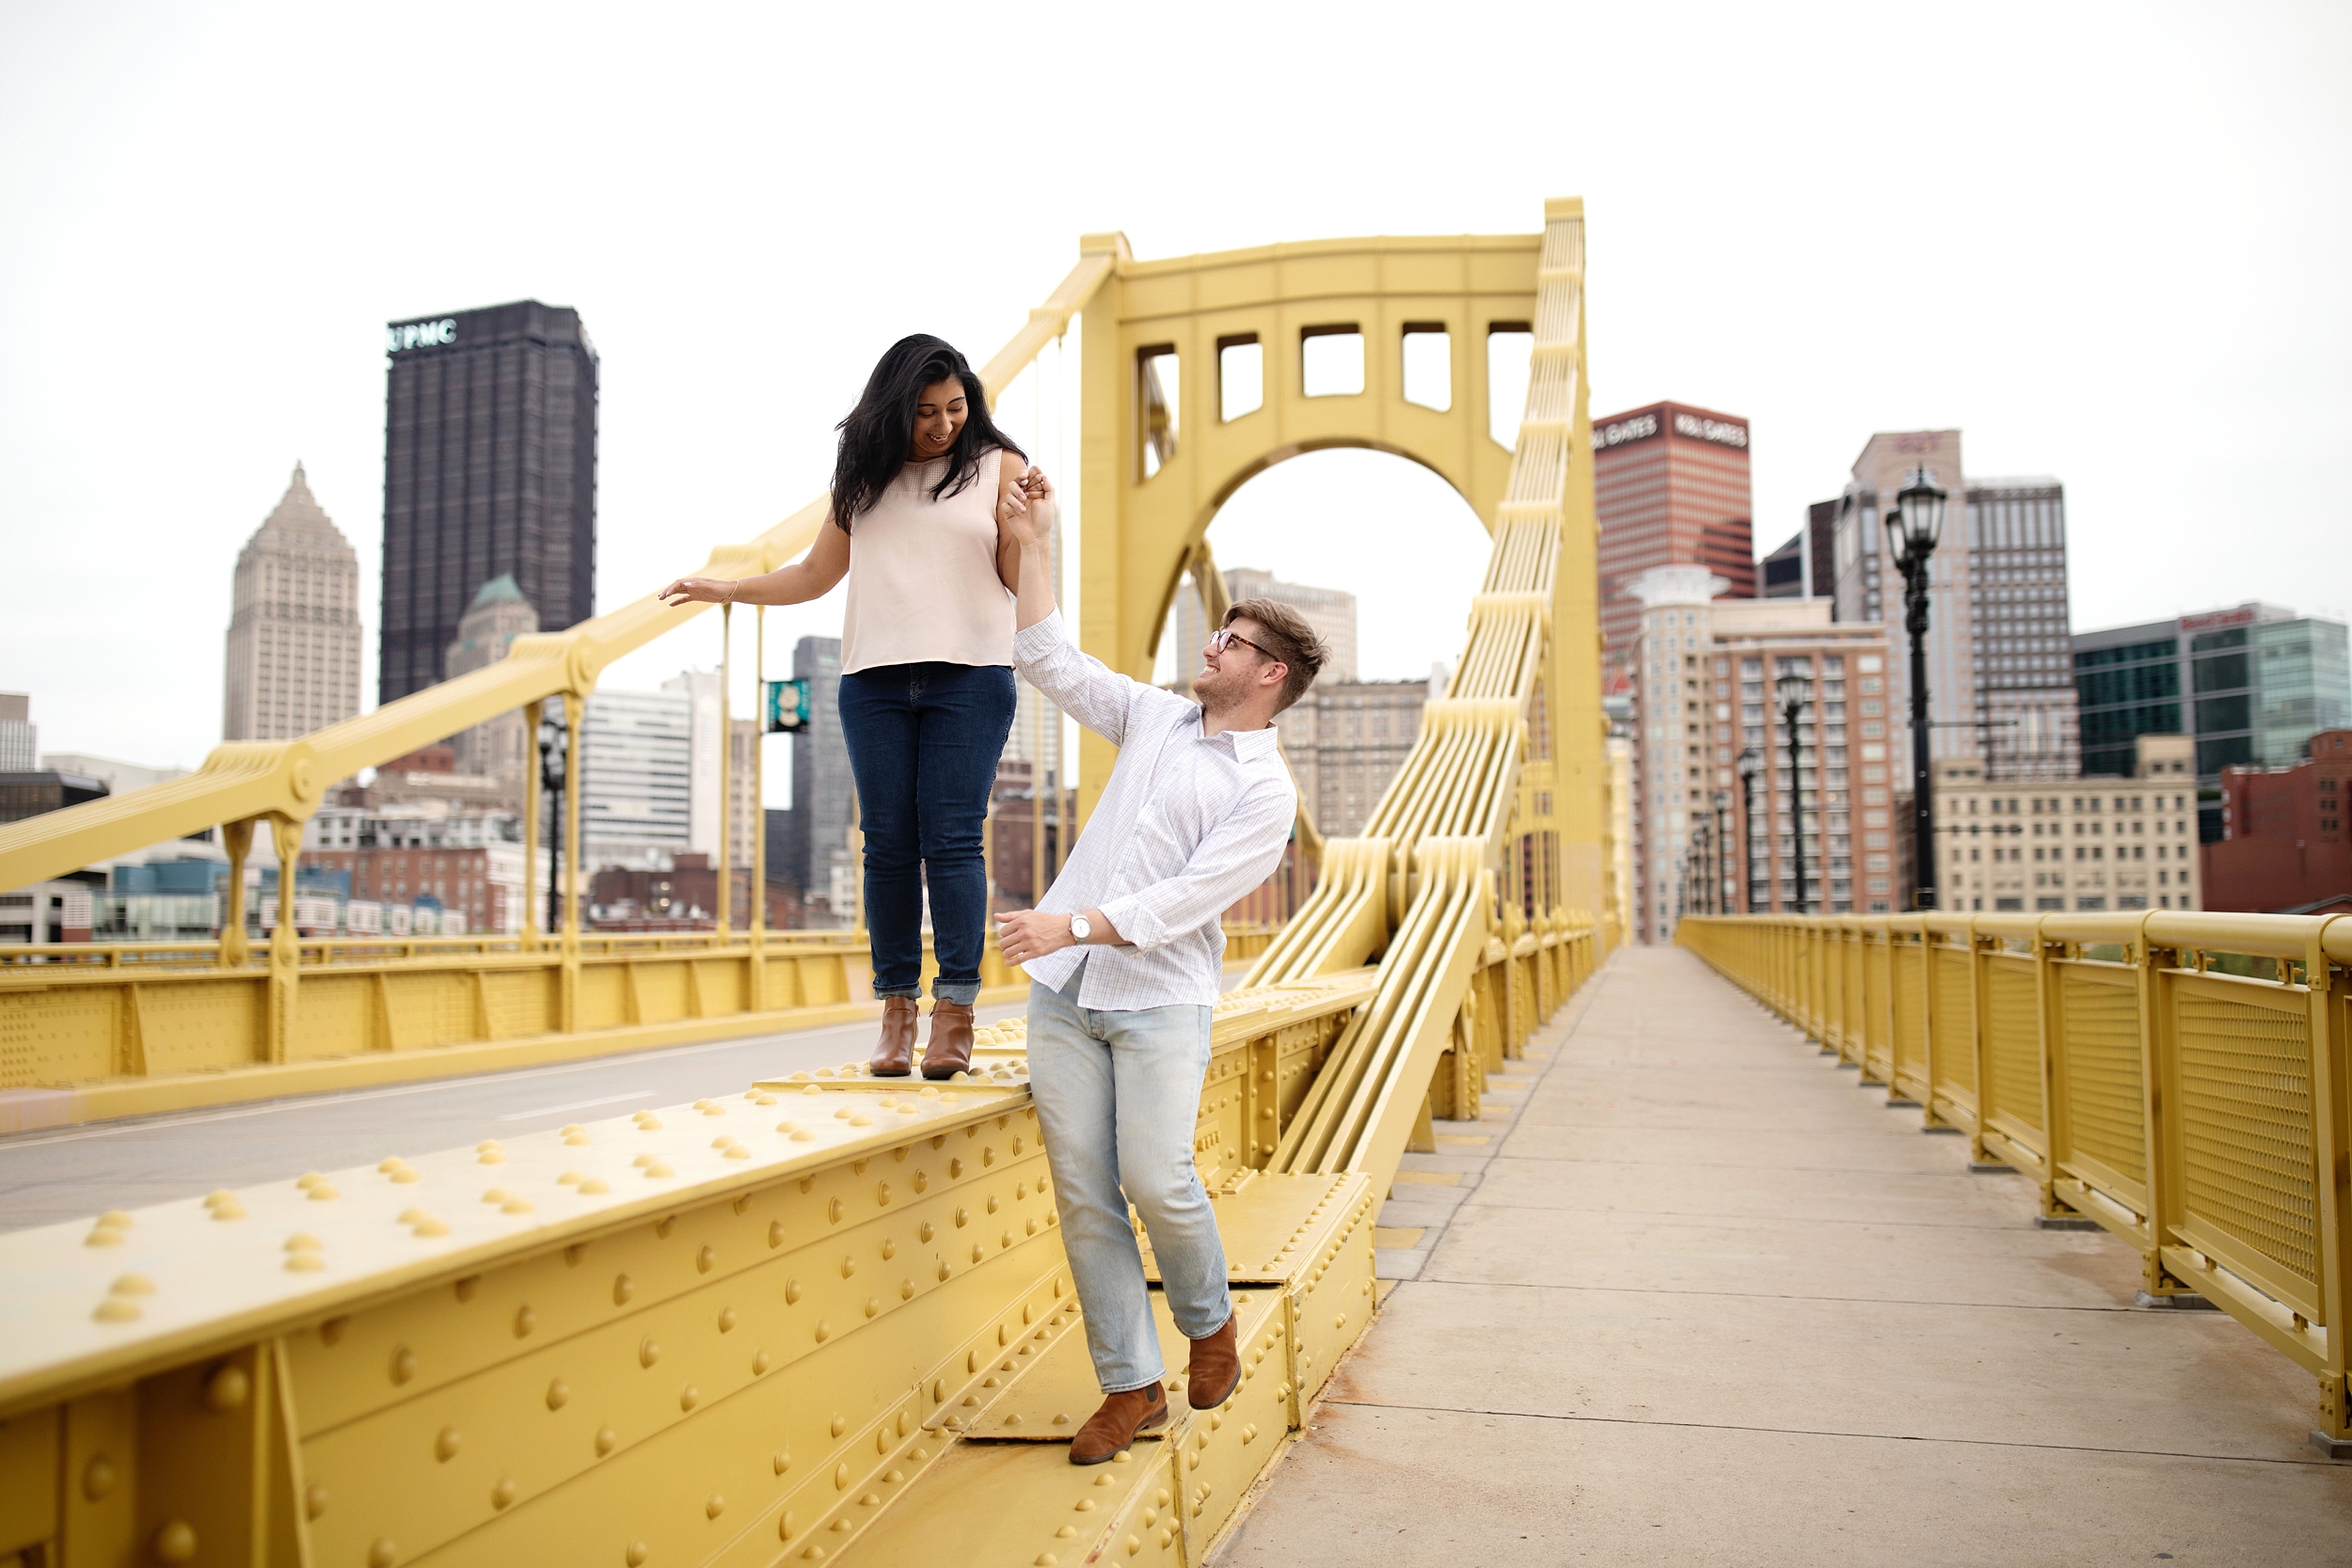 Mellon Park Pittsburgh PA Engagement Photos, captured by Pittsburgh Wedding Photographer Janae Rose Photography